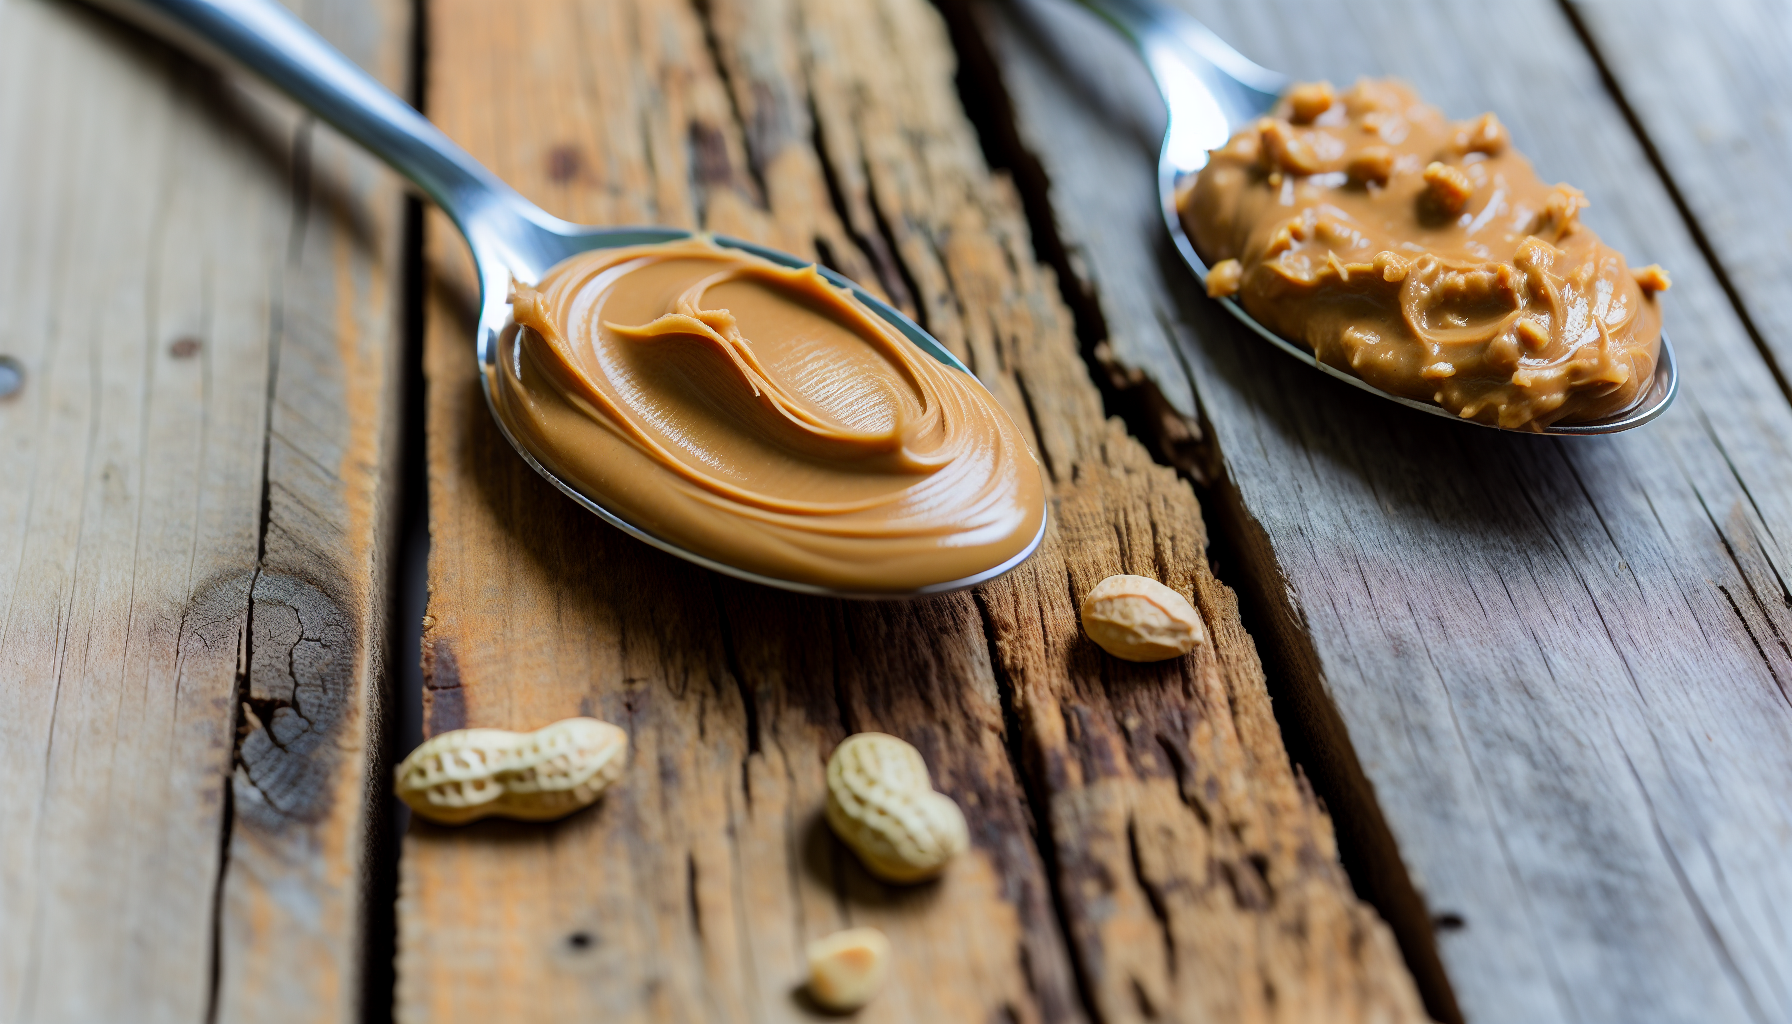 A comparison of creamy and crunchy organic peanut butter